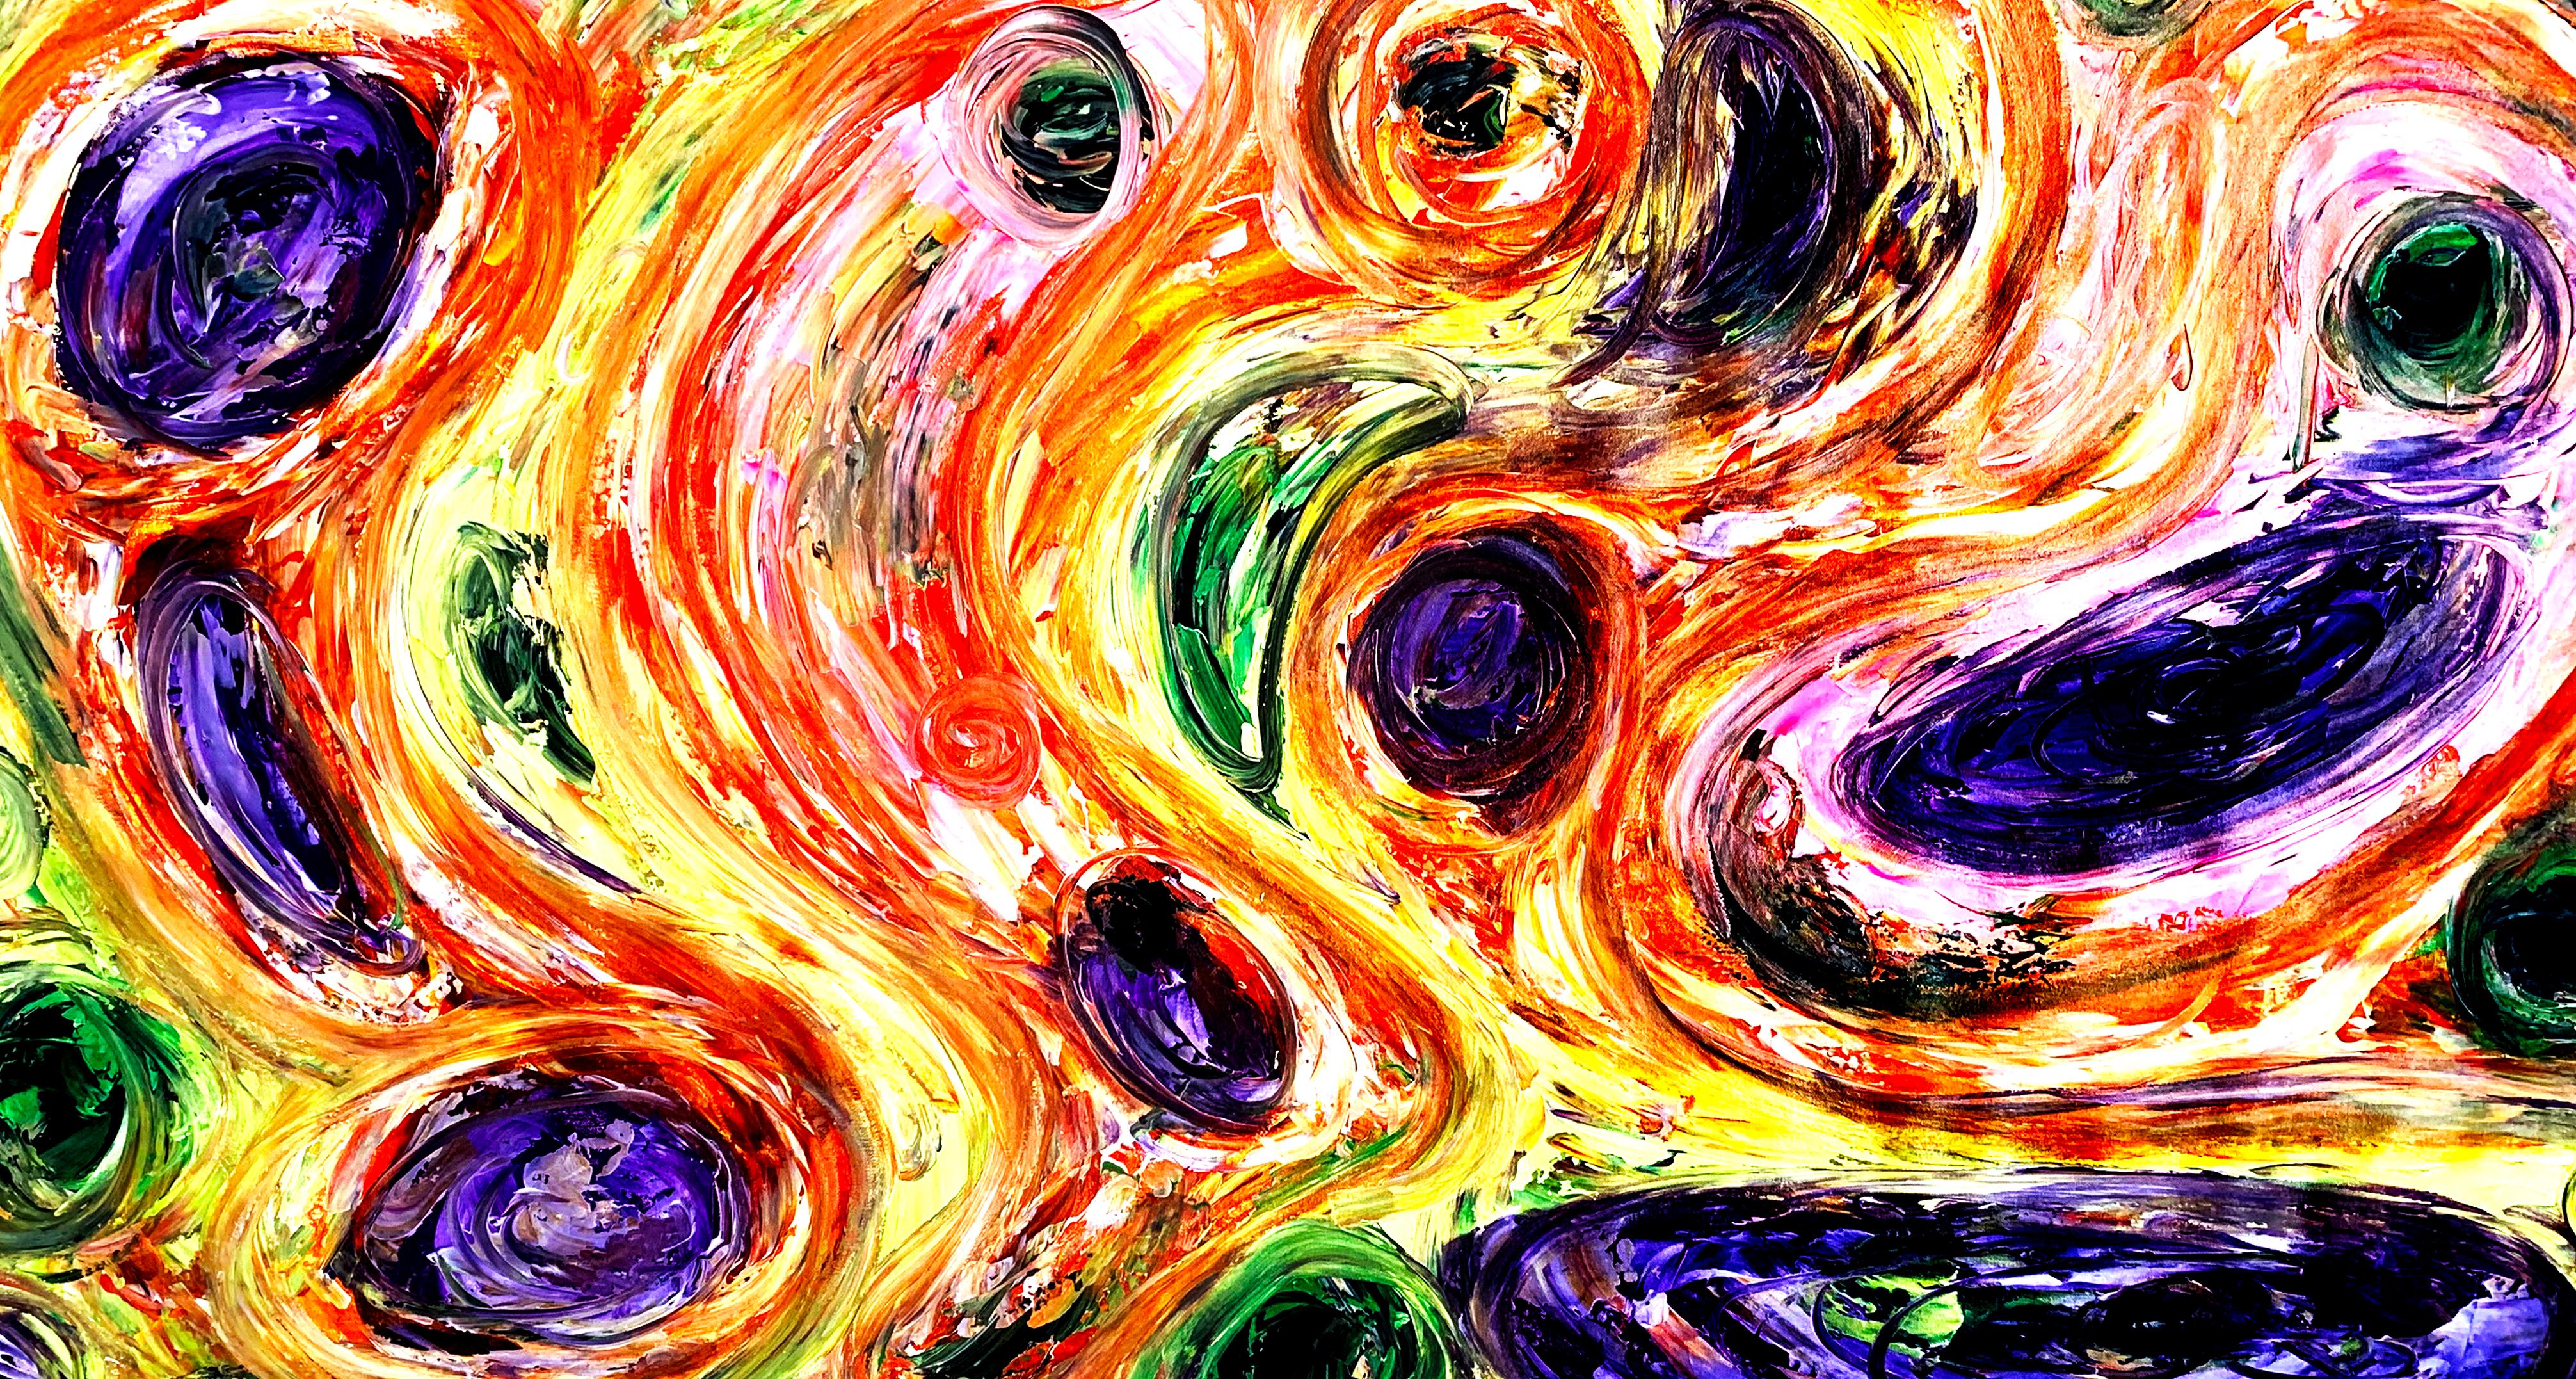 Estelle Asmodelle Abstract Painting - Cells within Cells